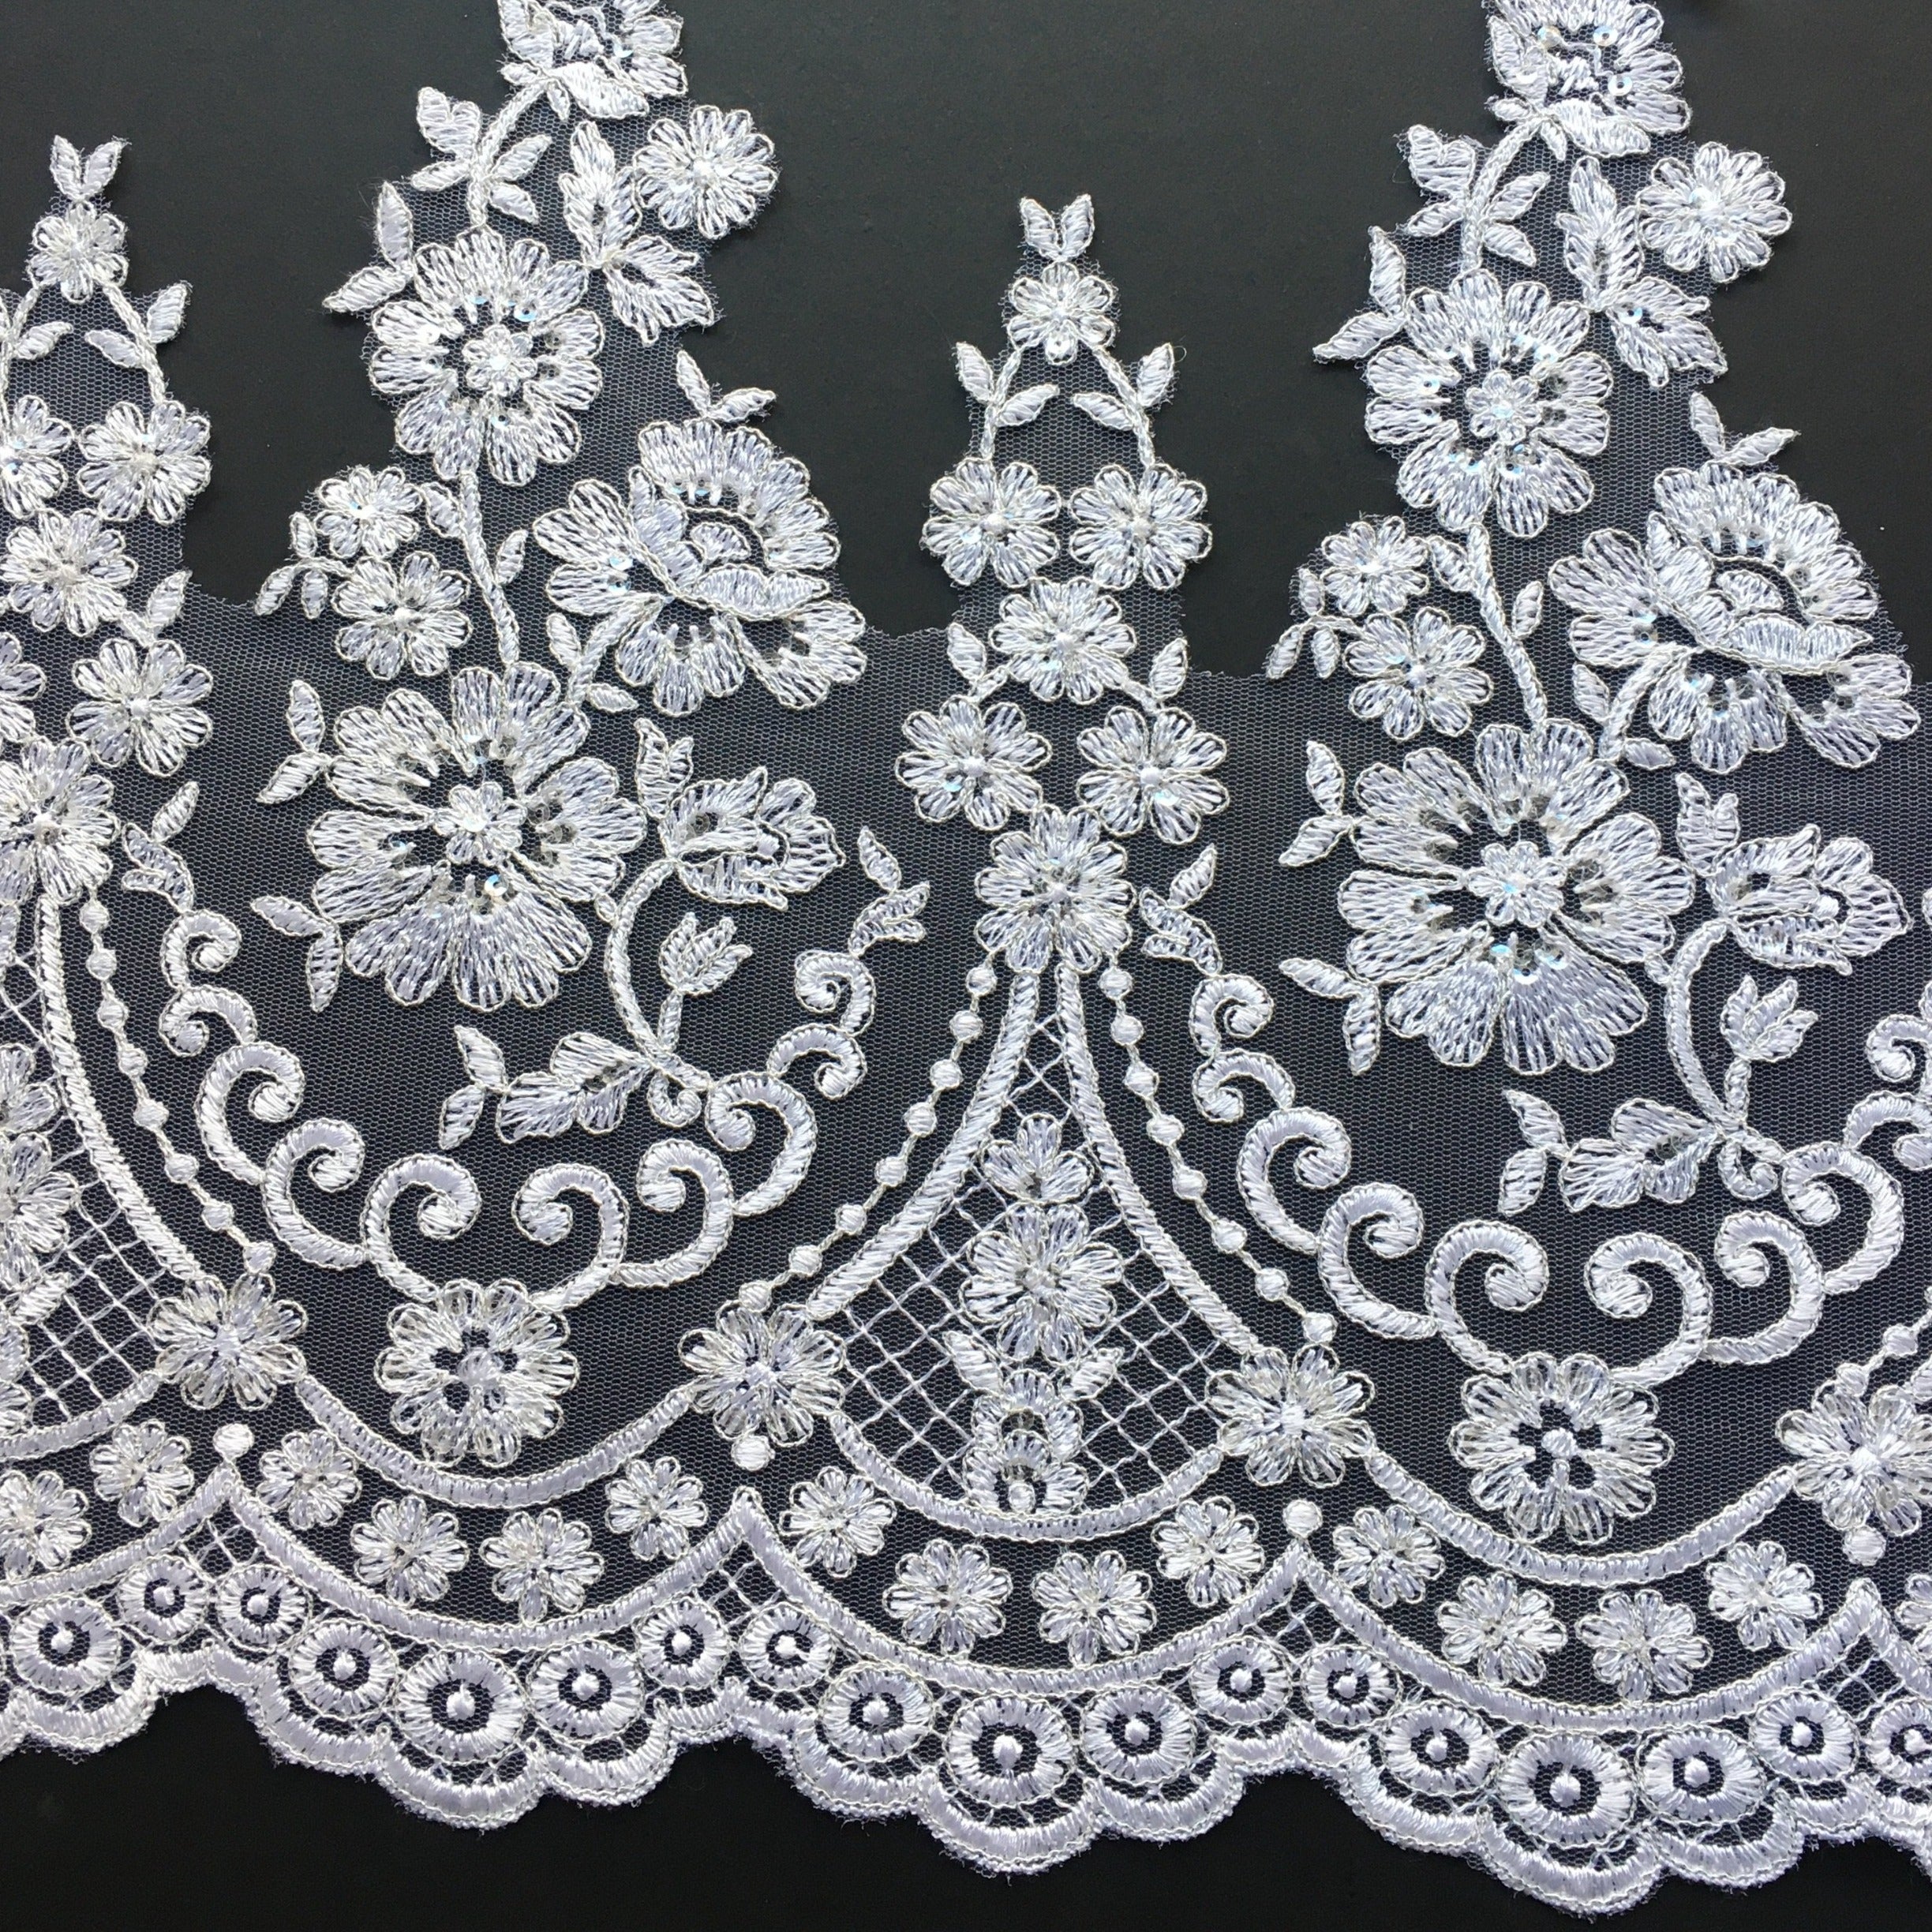 Stunning white floral lace border accented with silver thread and clear sequins.